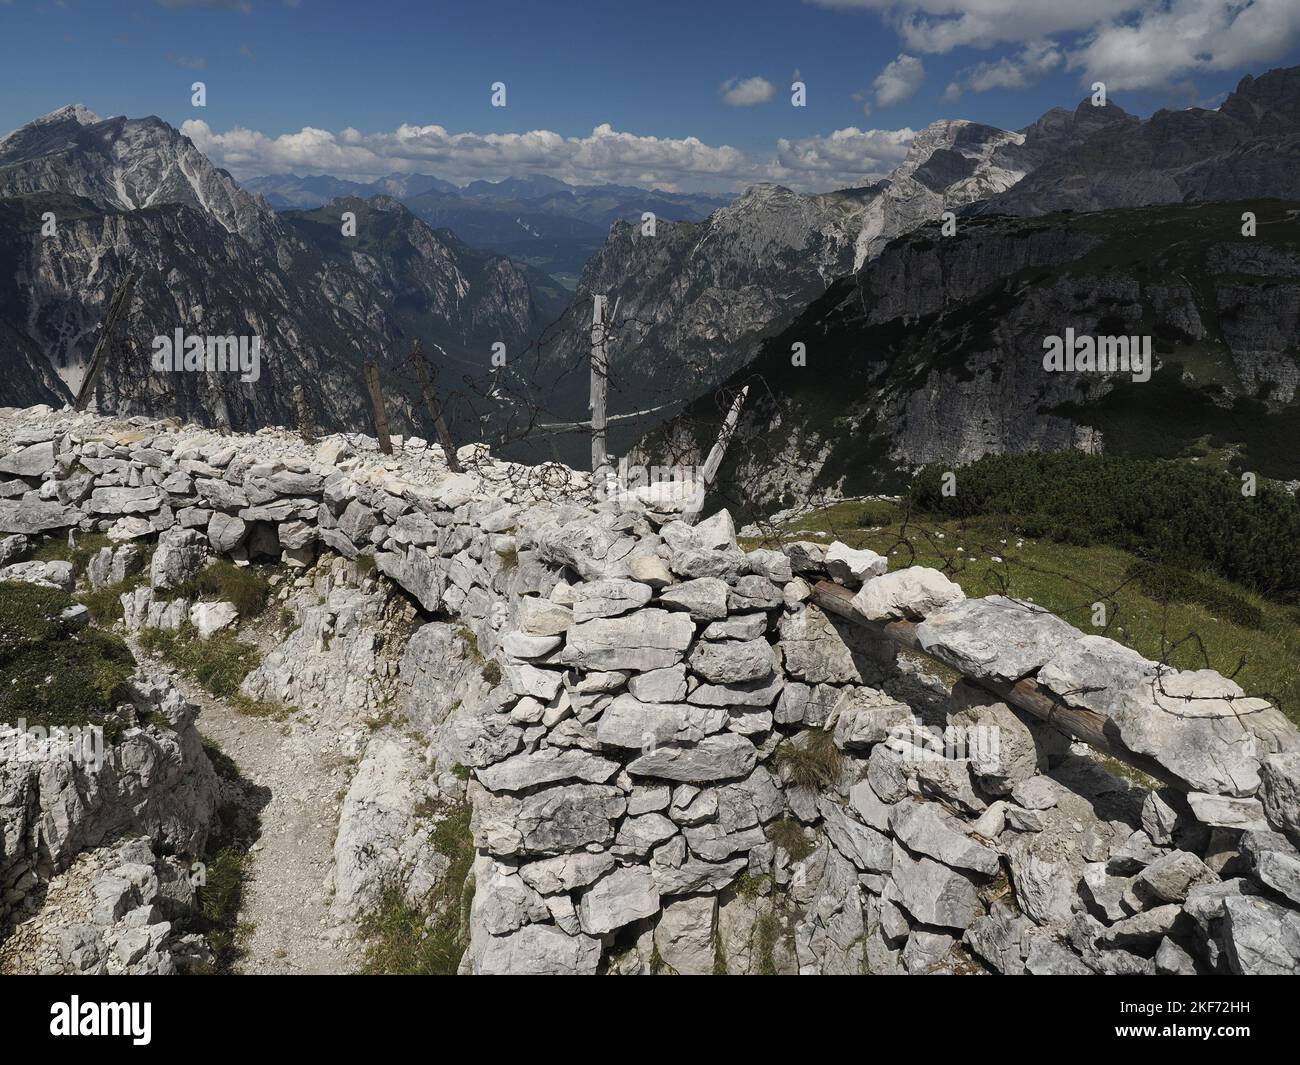 barbed wire near world war trench landscape moiuntain dolomites Stock Photo